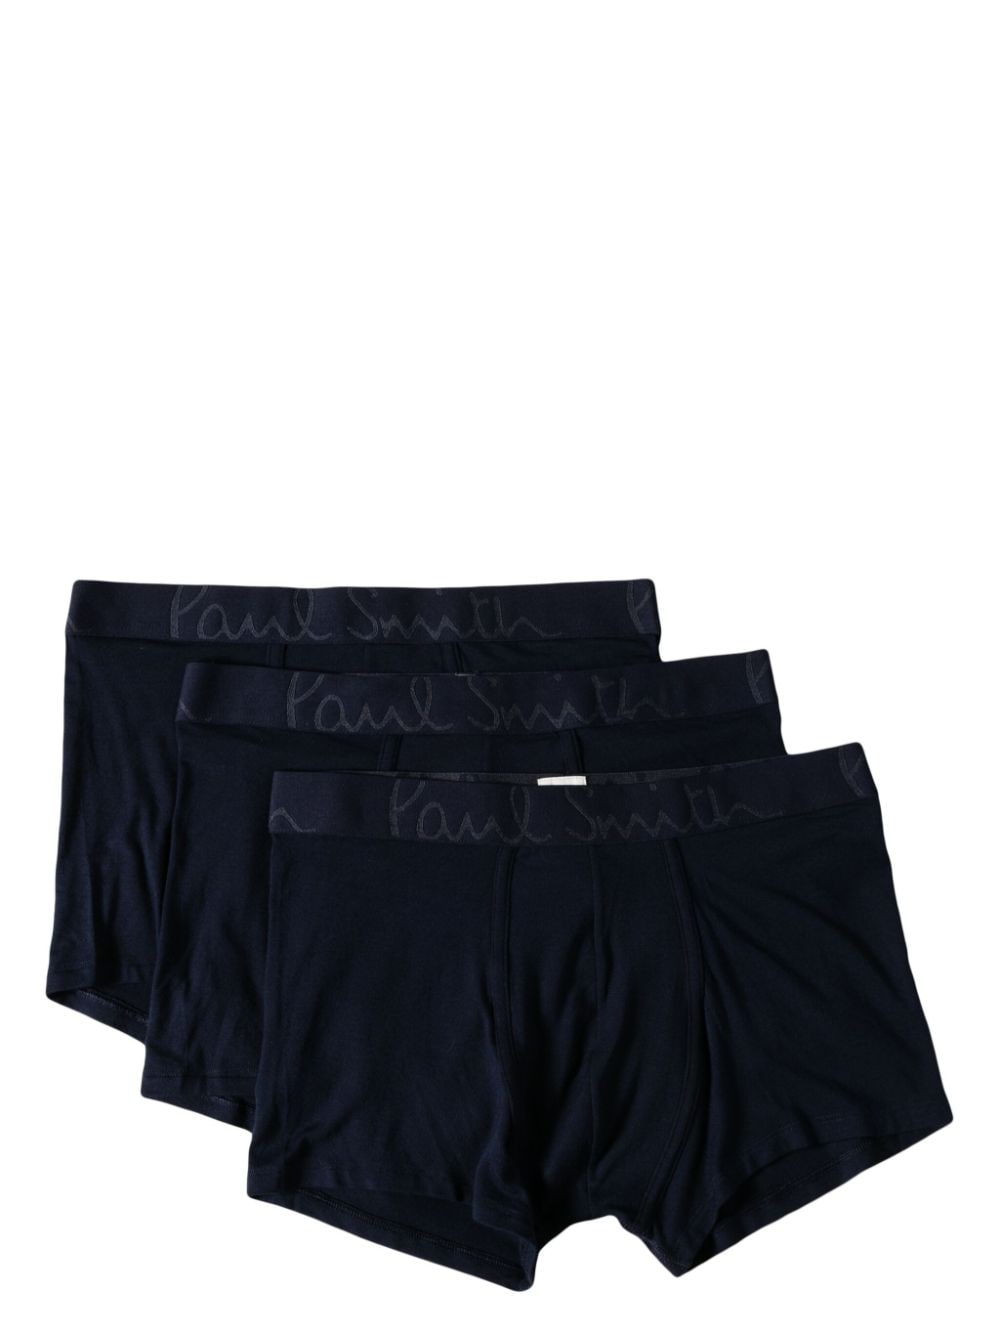 Image 1 of Paul Smith logo-waistband boxers (pack of three)